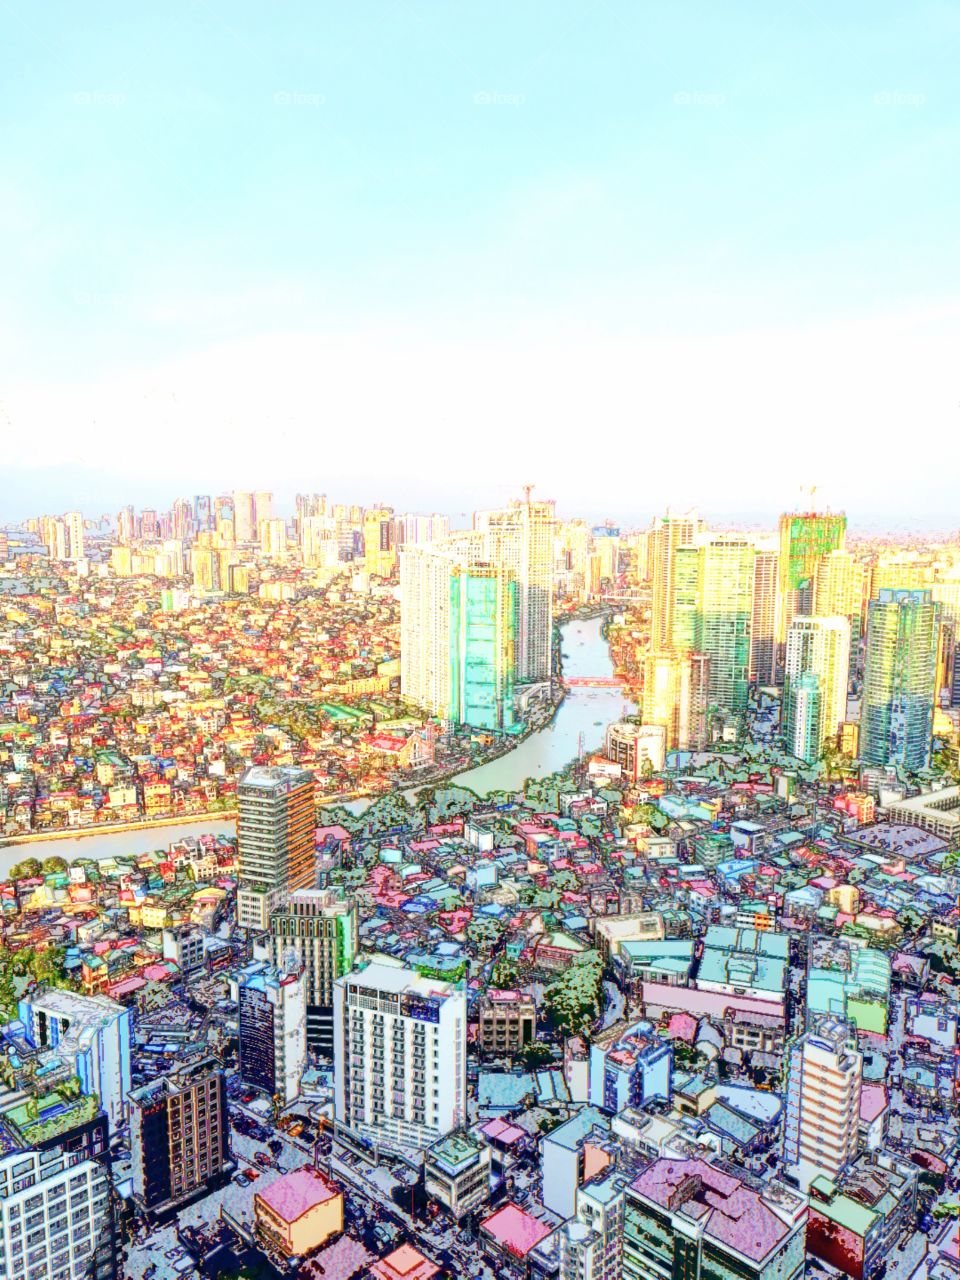 Drawing of Manila Skyline with famous Pasig River meandering through Metro Manila, Luzon, Island of Philippines